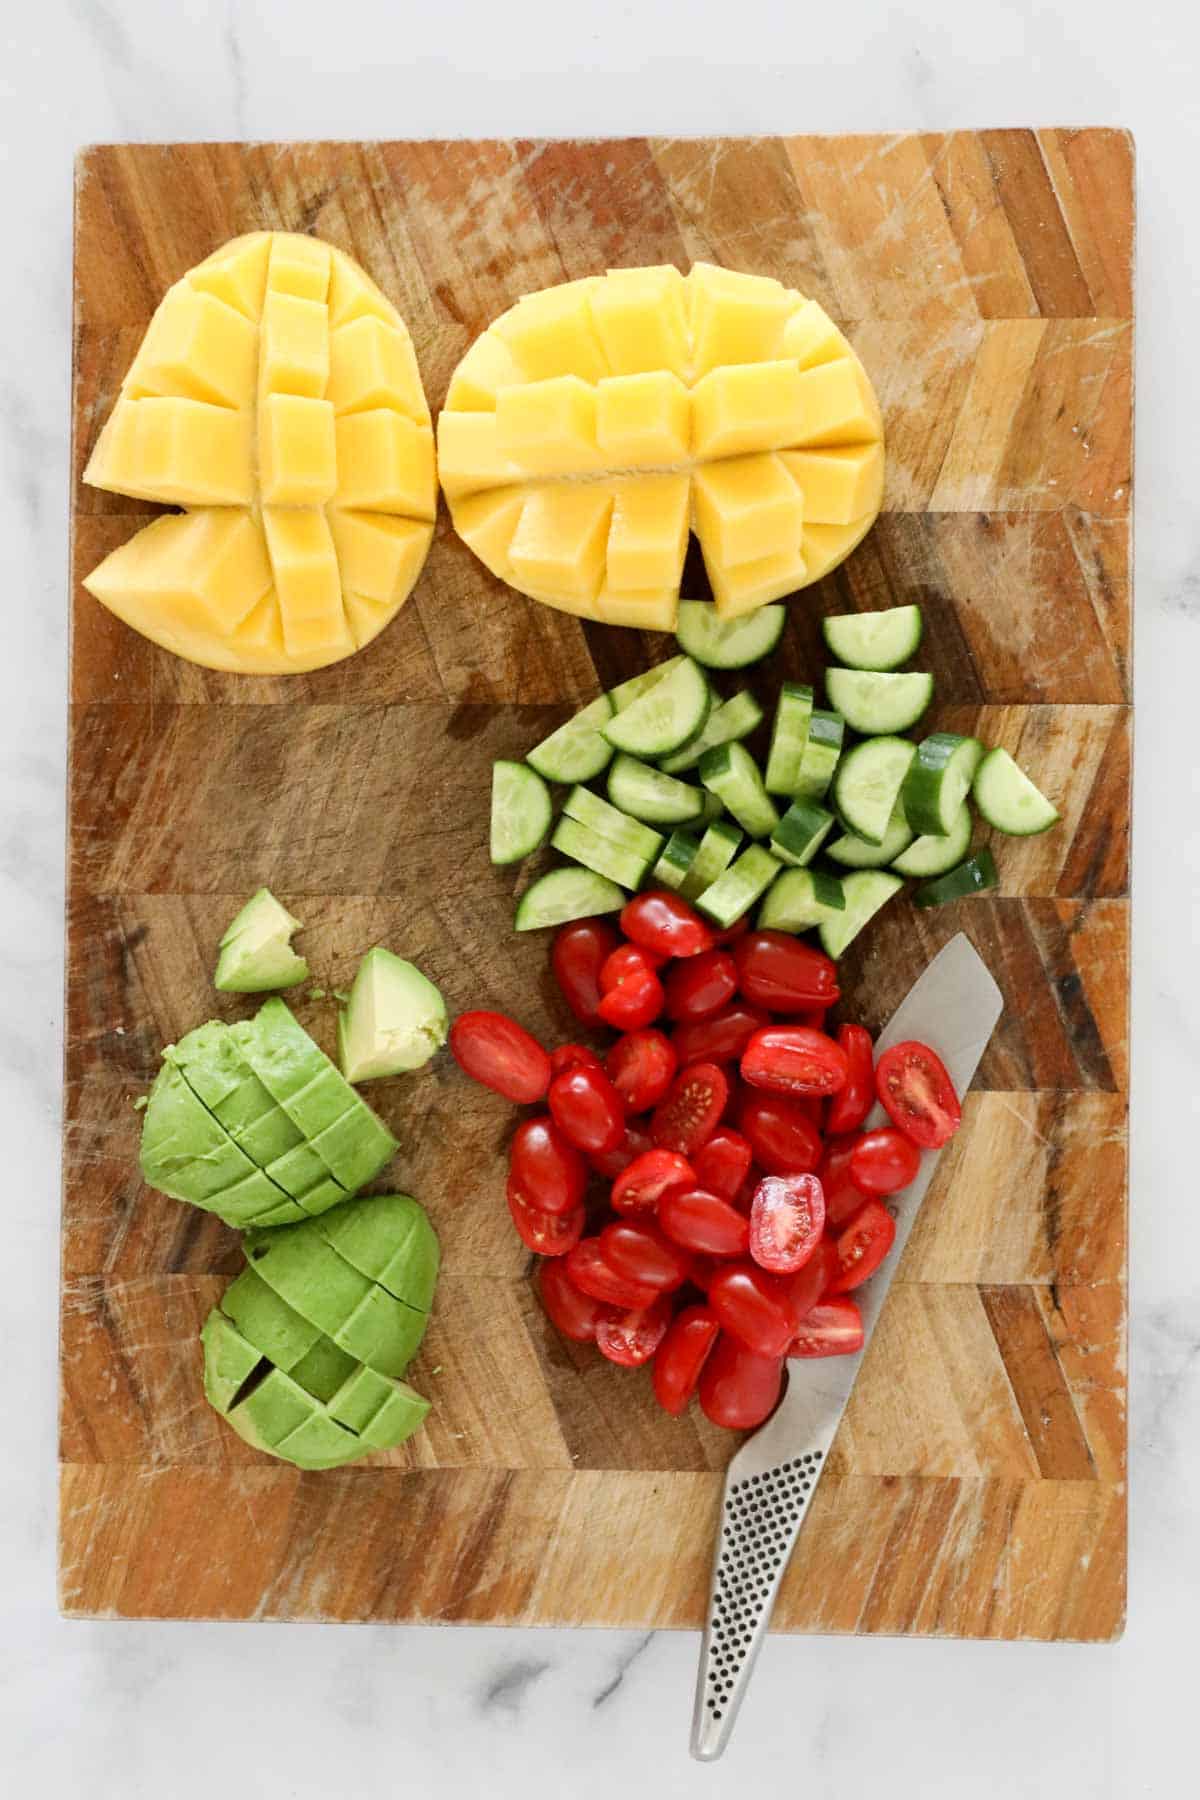 A cubed mango, avocado, cucumber and tomatoes on a wooden chopping board.